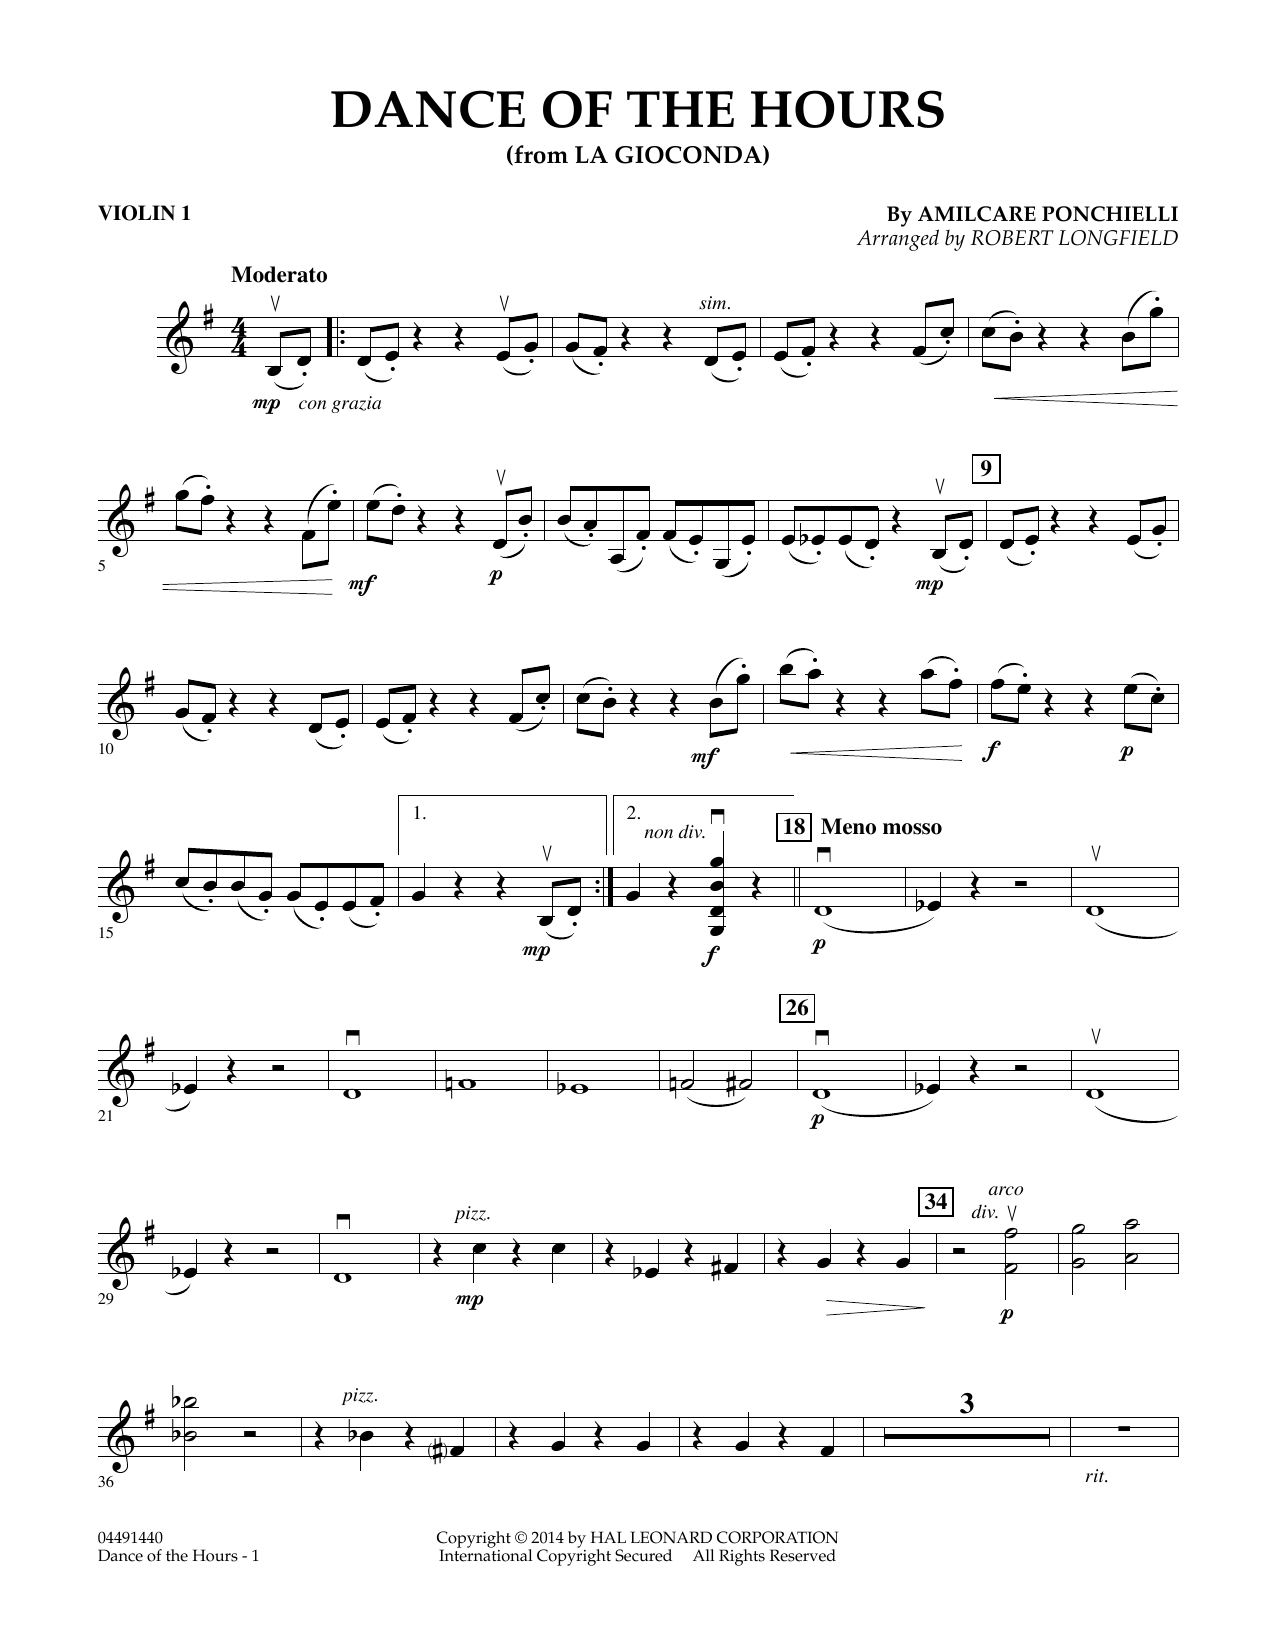 Download Amilcare Ponchielli Dance of the Hours (arr. Robert Longfield) - Violin 1 sheet music and printable PDF score & Classical music notes